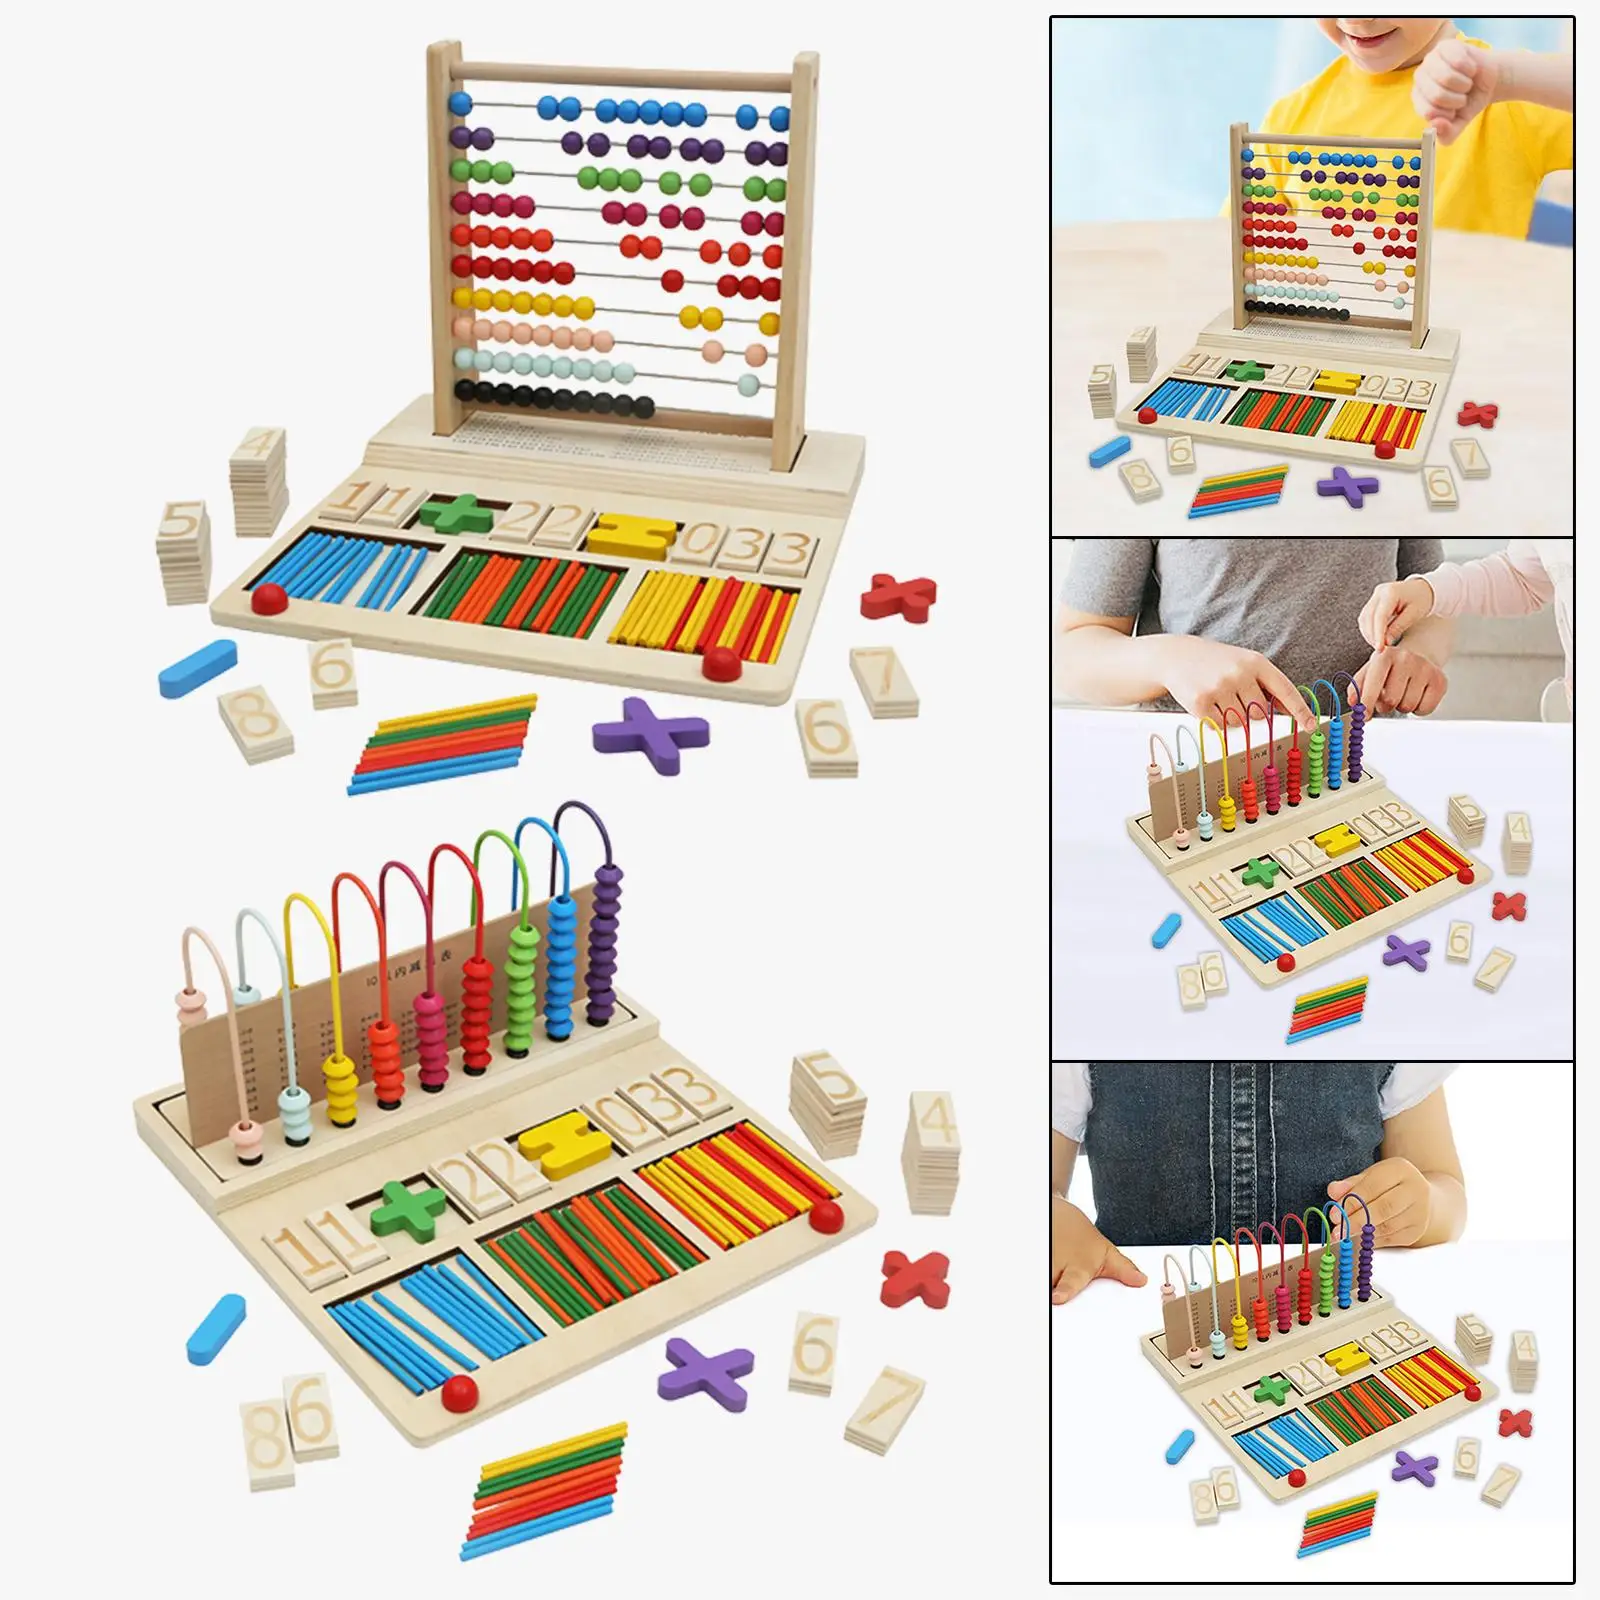 Math Learning Toys Counting Math Games Classic Counting Tool Educational Colorful Beads Counting Toys for Kids Holiday Gifts